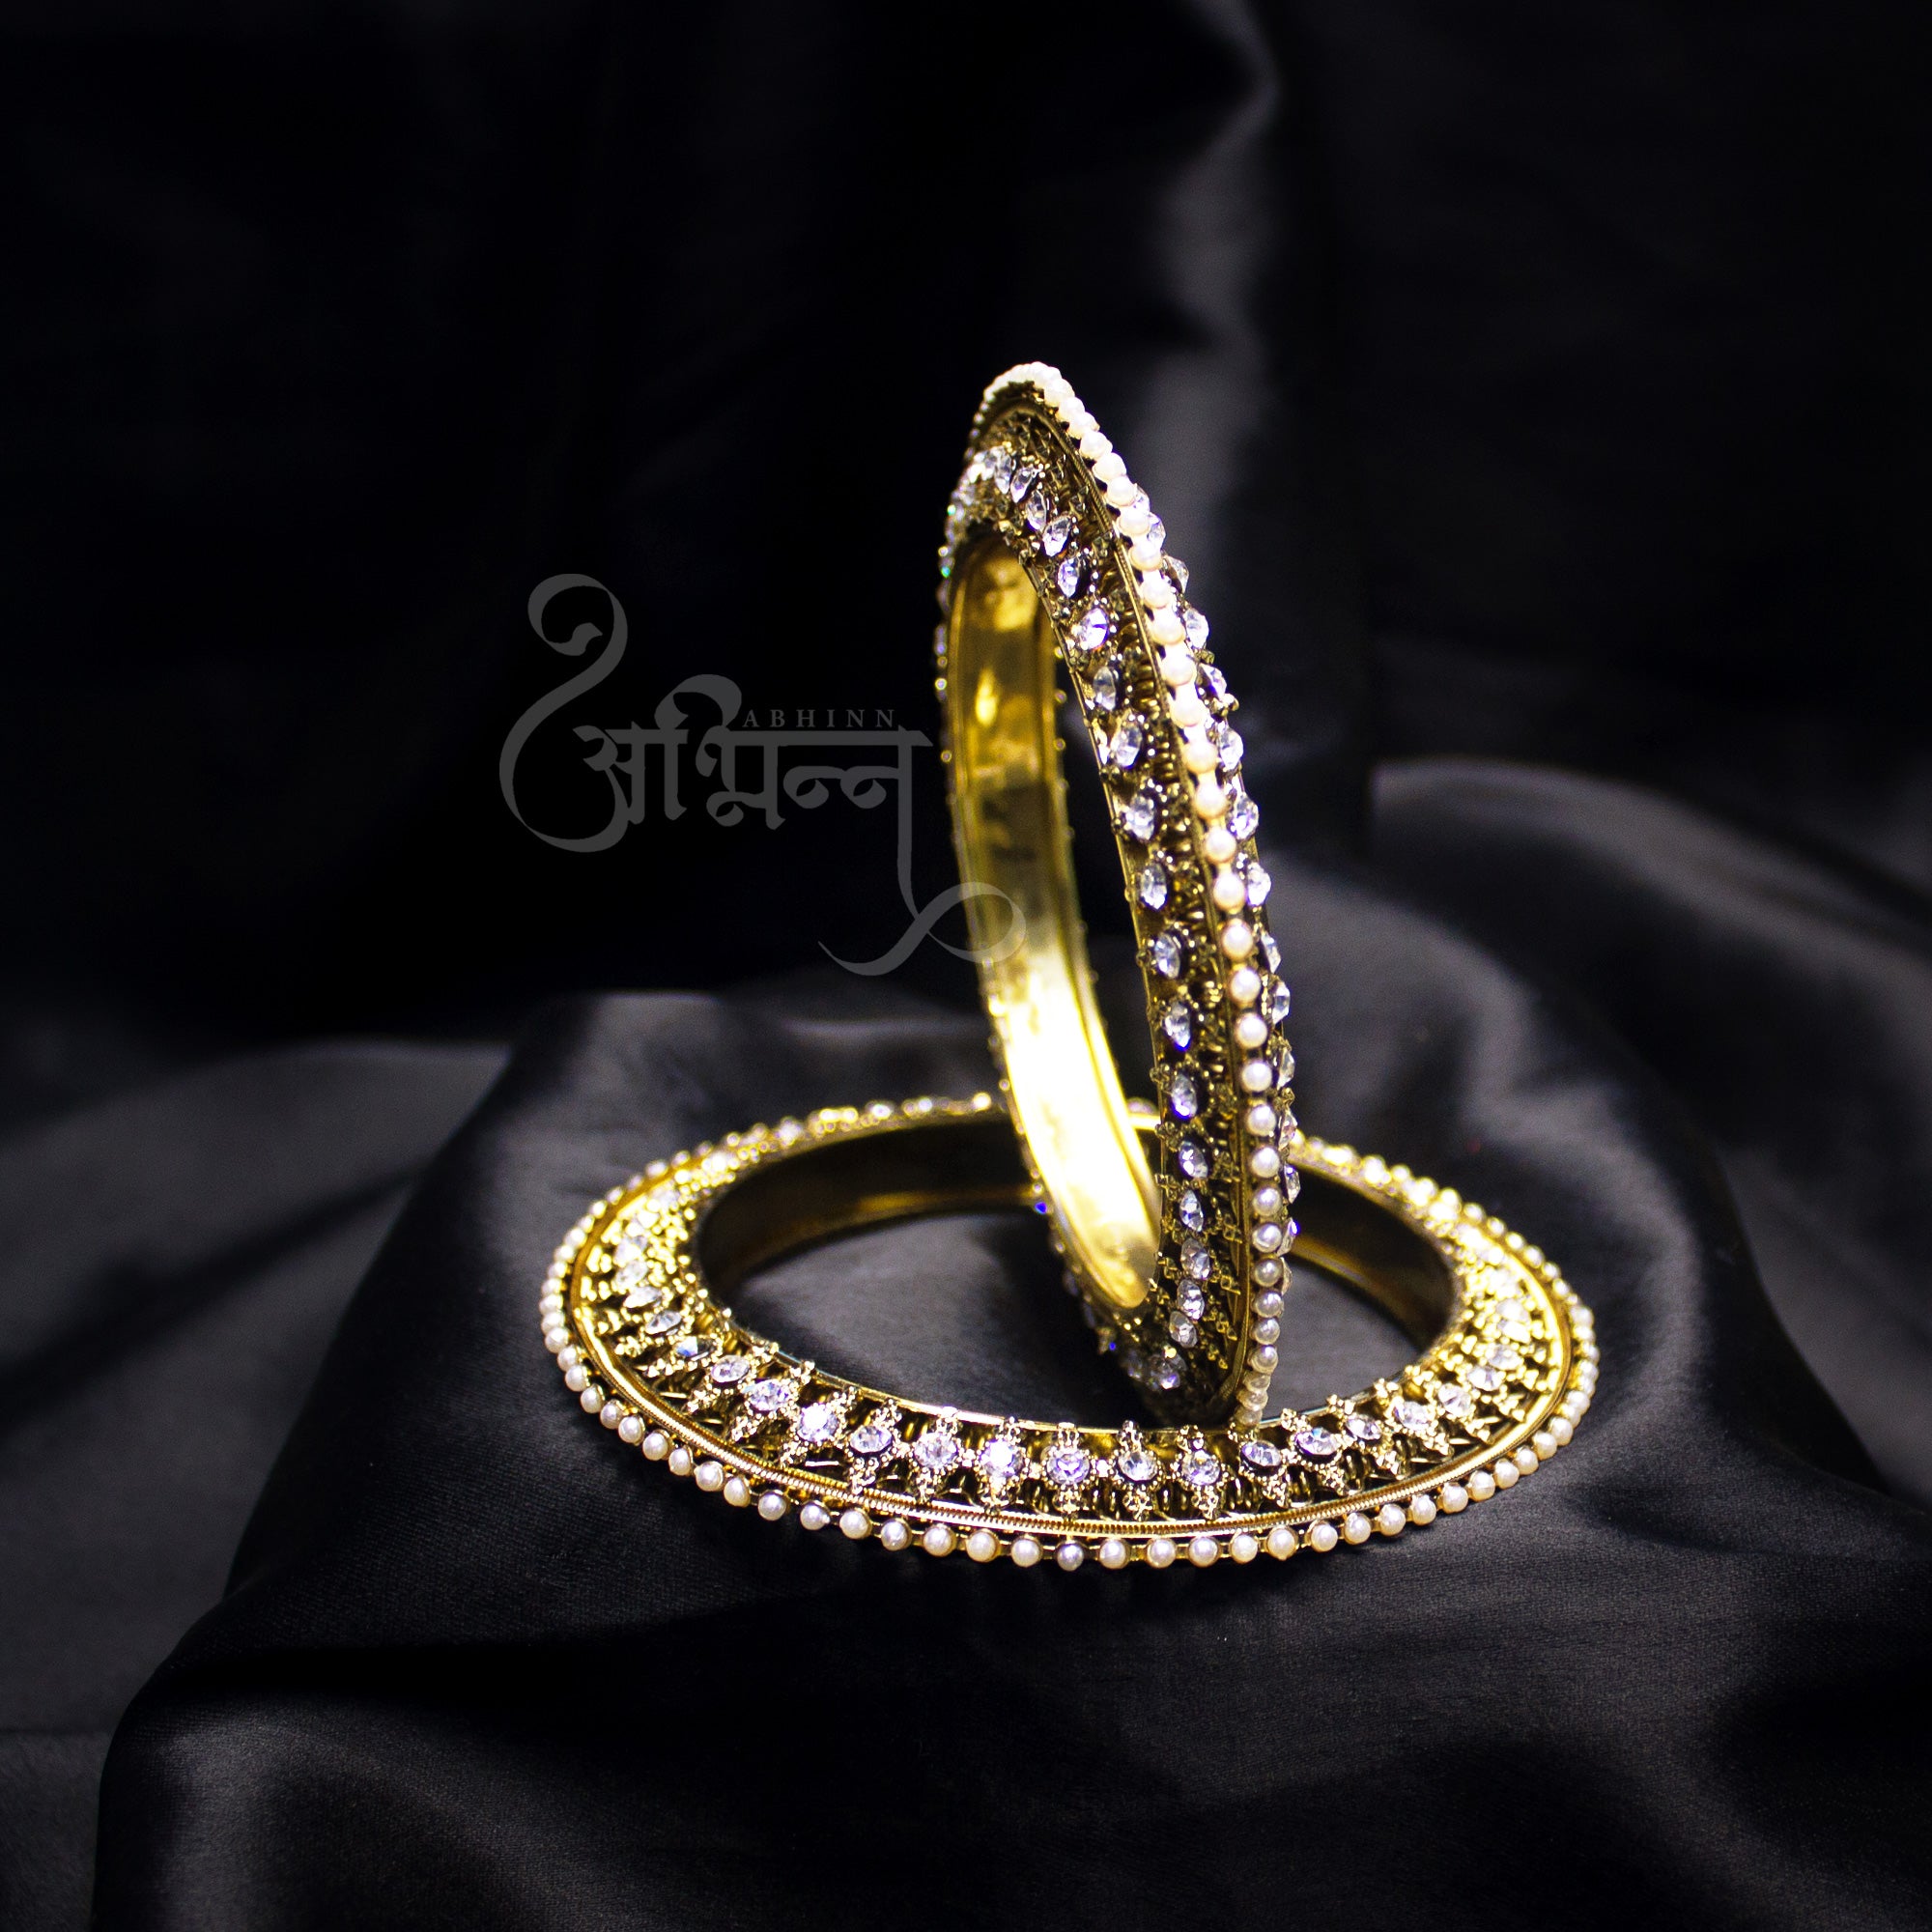 Abhinn Antique Gold Plated Bangle Set Studded With White Pearls And CZ Stones For Women